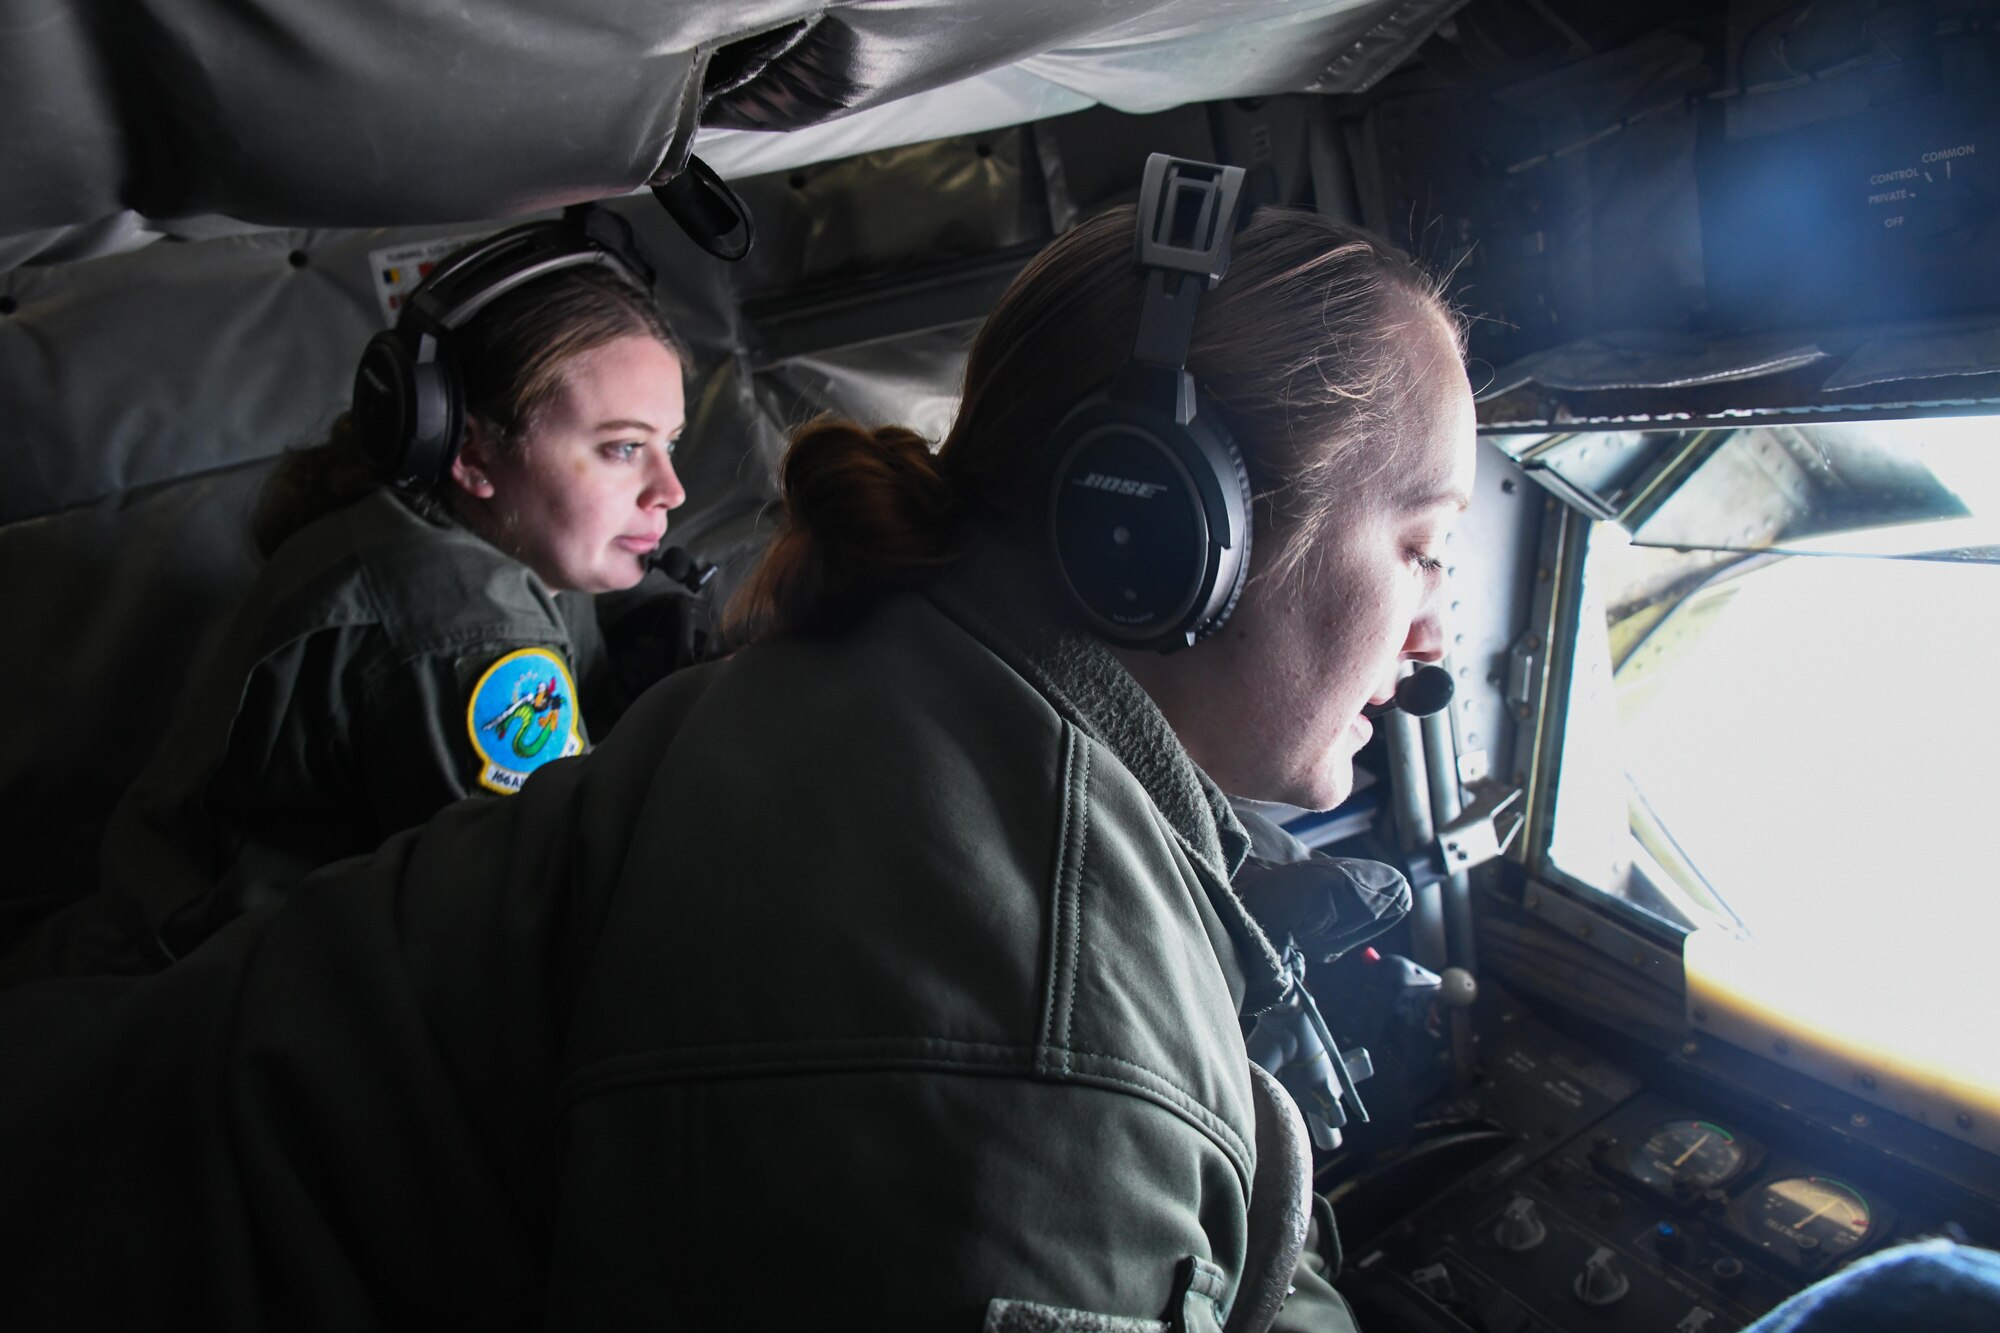 U.S. Air Force Tech. Sgt. Samantha Grendahl (right), 54th Air Refueling Squadron (ARS) instructor boom operator, and Airman 1st Class Maddie Veyon,166th ARS boom operator in training, position the boom of a KC-135 Stratotanker at Altus Air Force Base, Oklahoma, March 28, 2023. Boom operators are responsible for transferring fuel from one aircraft to another while in flight. (U.S. Air Force photo by Airman 1st Class Miyah Gray)